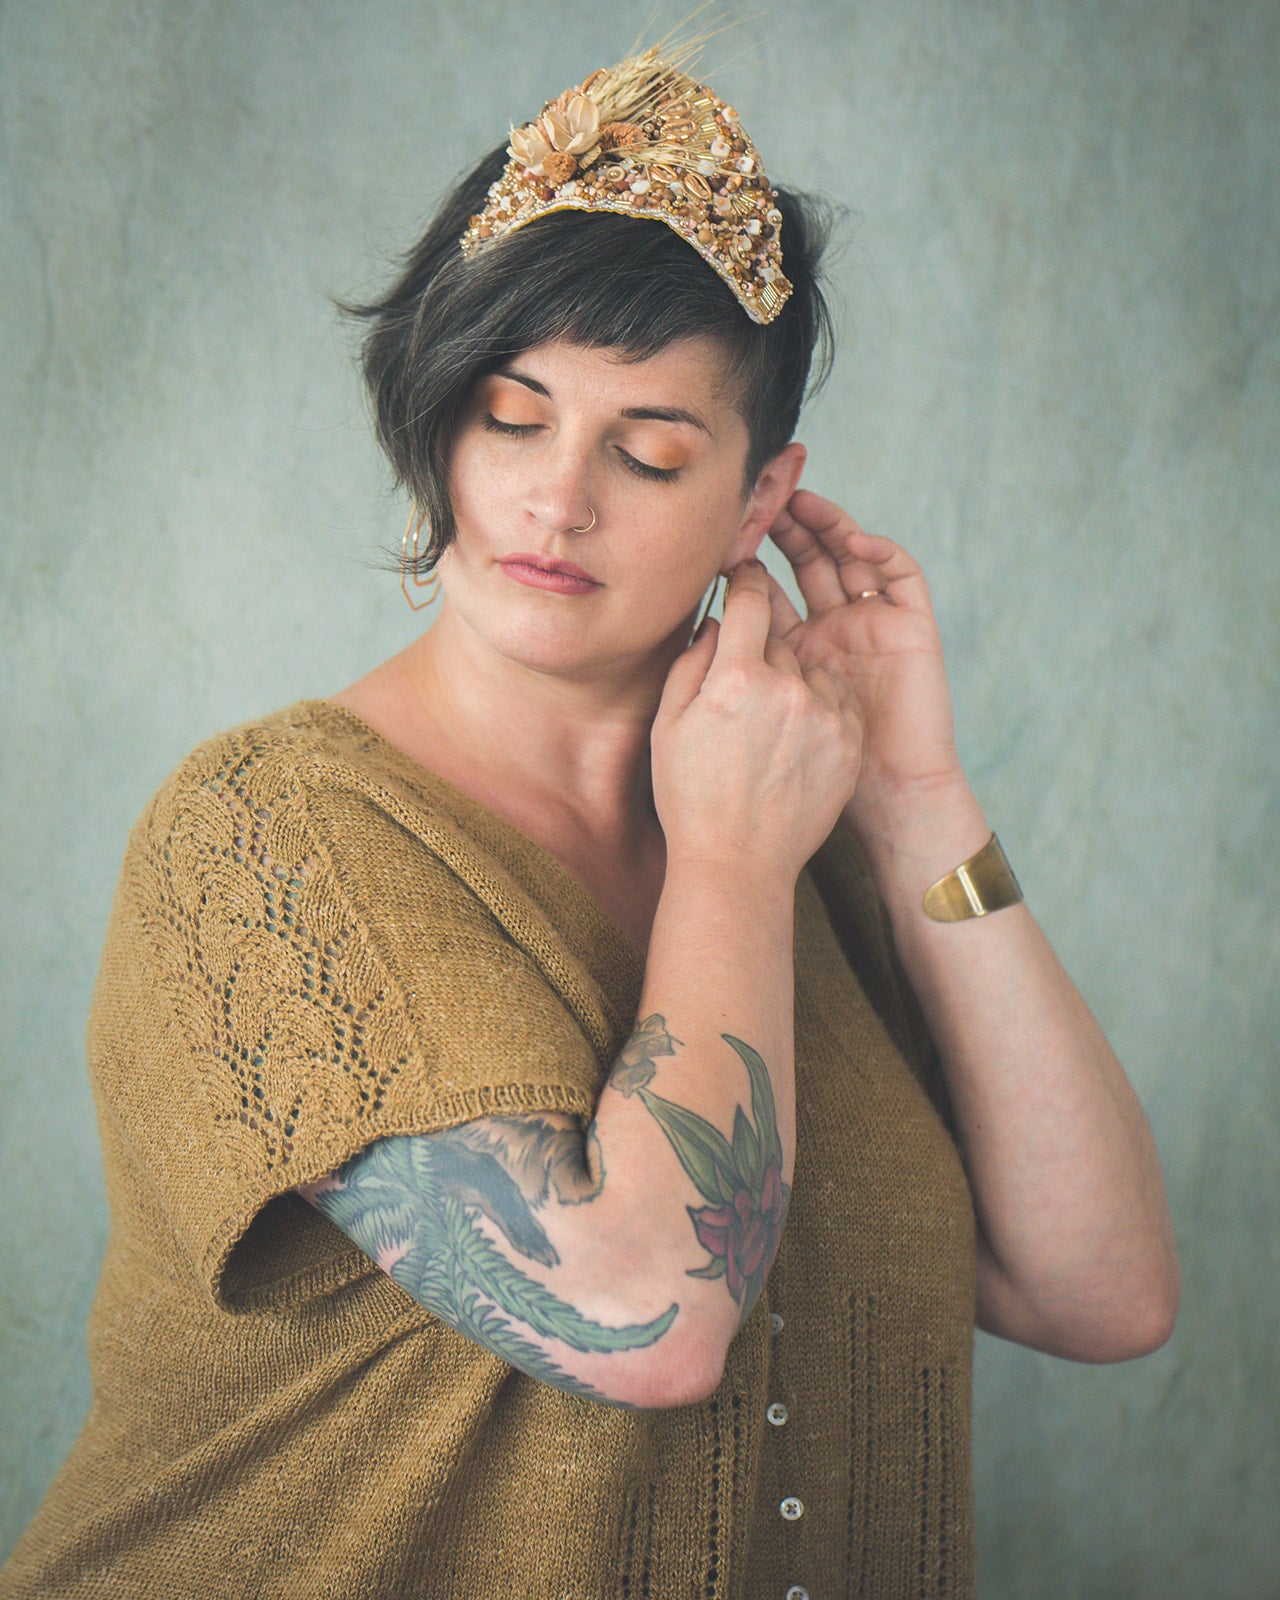 Jen turns to the side, adjusting her gold earrings. The angle shows off the leafy lace panel on the sleeve of her gold, knit dolman tee. The shirt is closed with five pearl buttons down the front, which are outlined by eyelet lace strips.